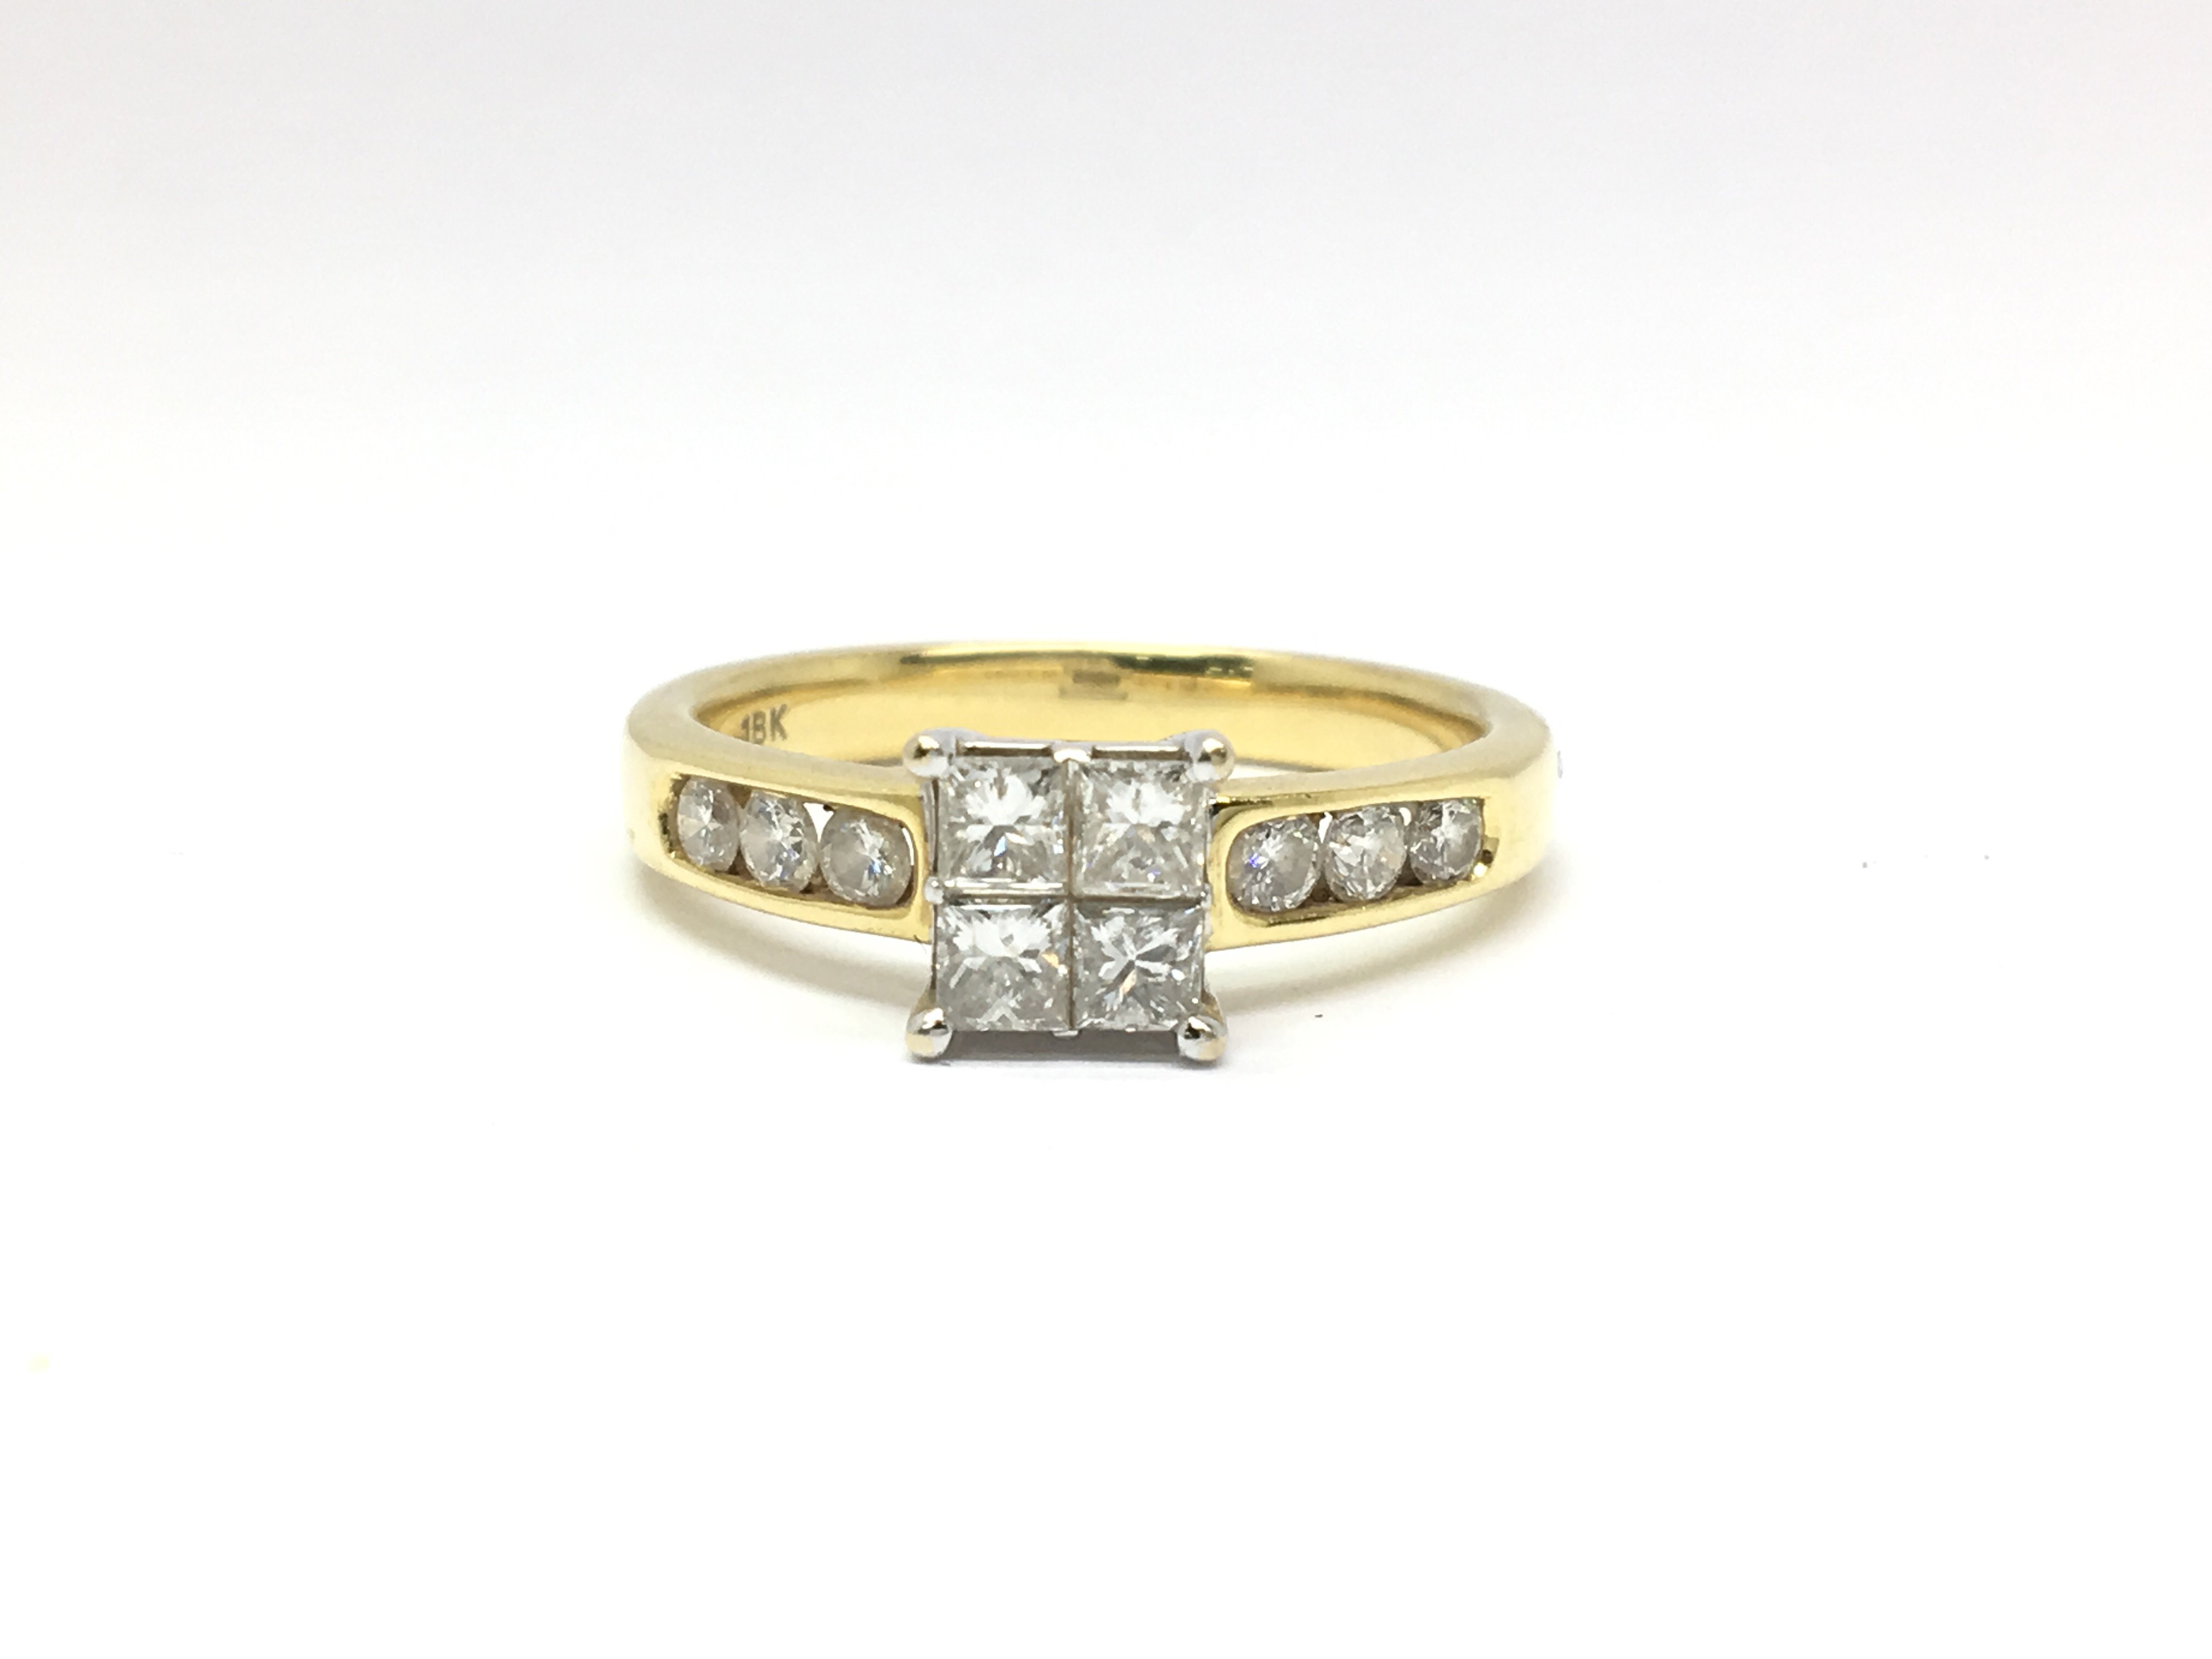 An 18ct yellow gold ring set with four central diamonds in a square formation, flanked either side